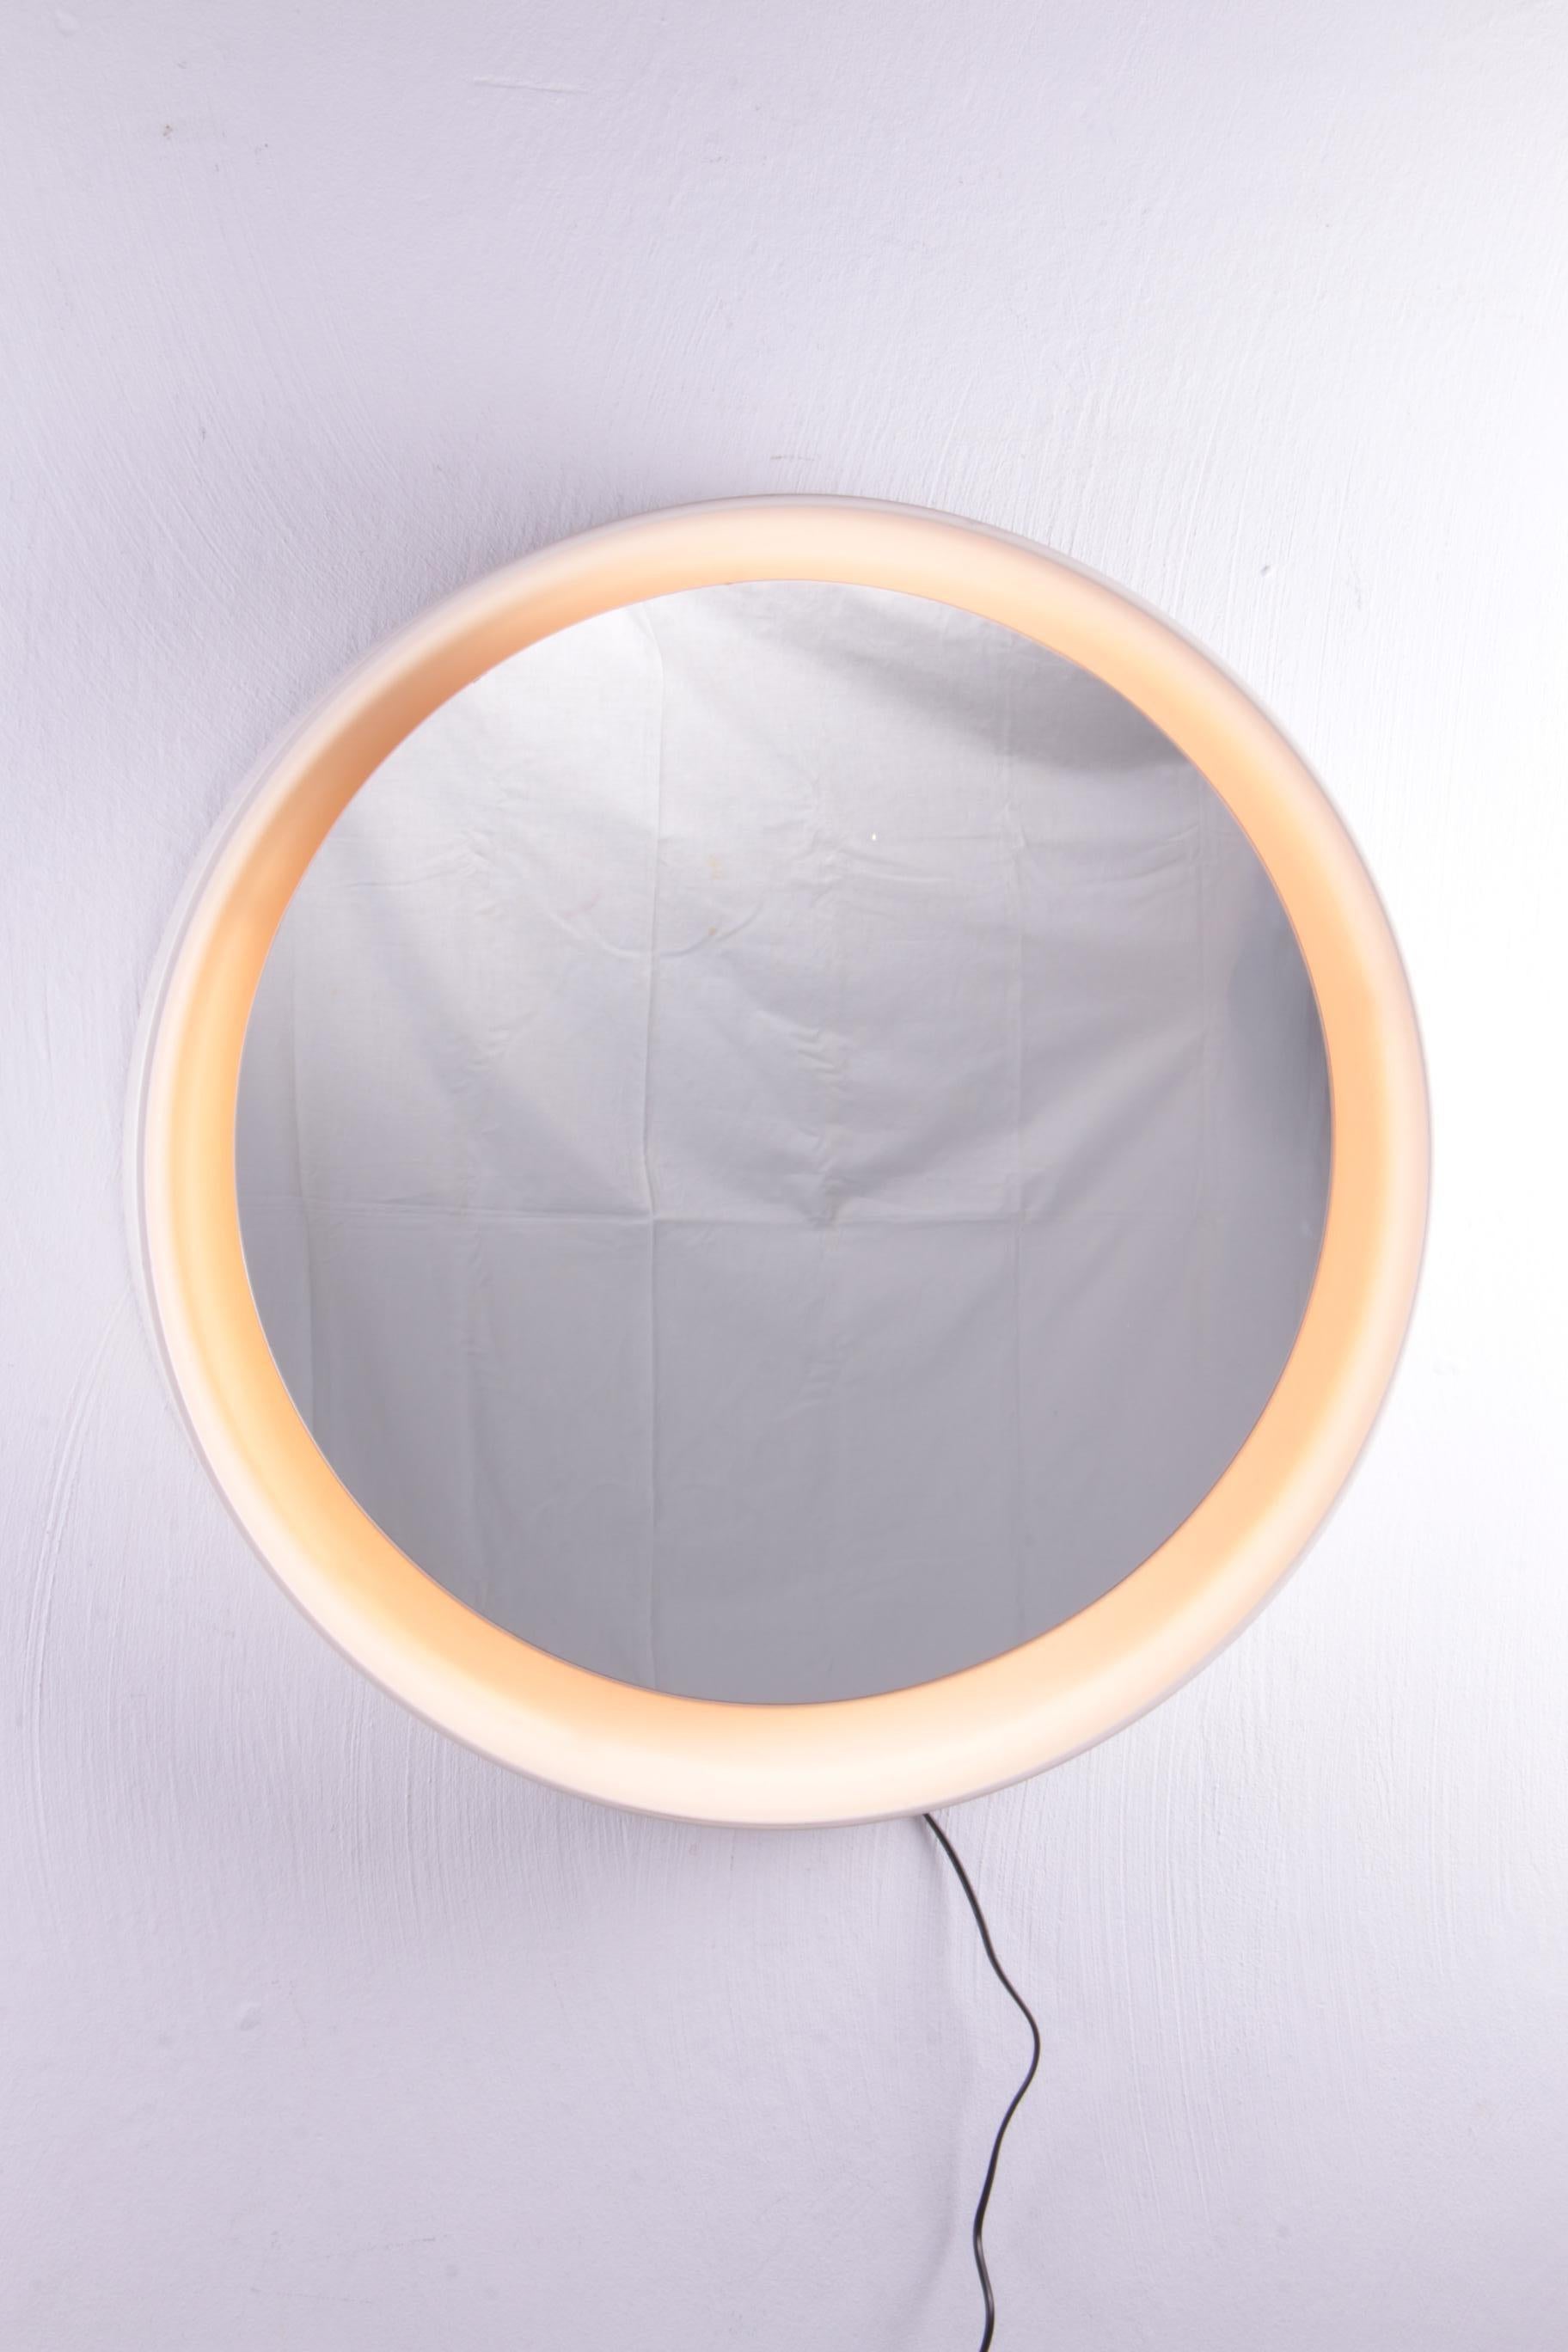 Painted Italian Large Round Mirror with Lighting, 1960s For Sale